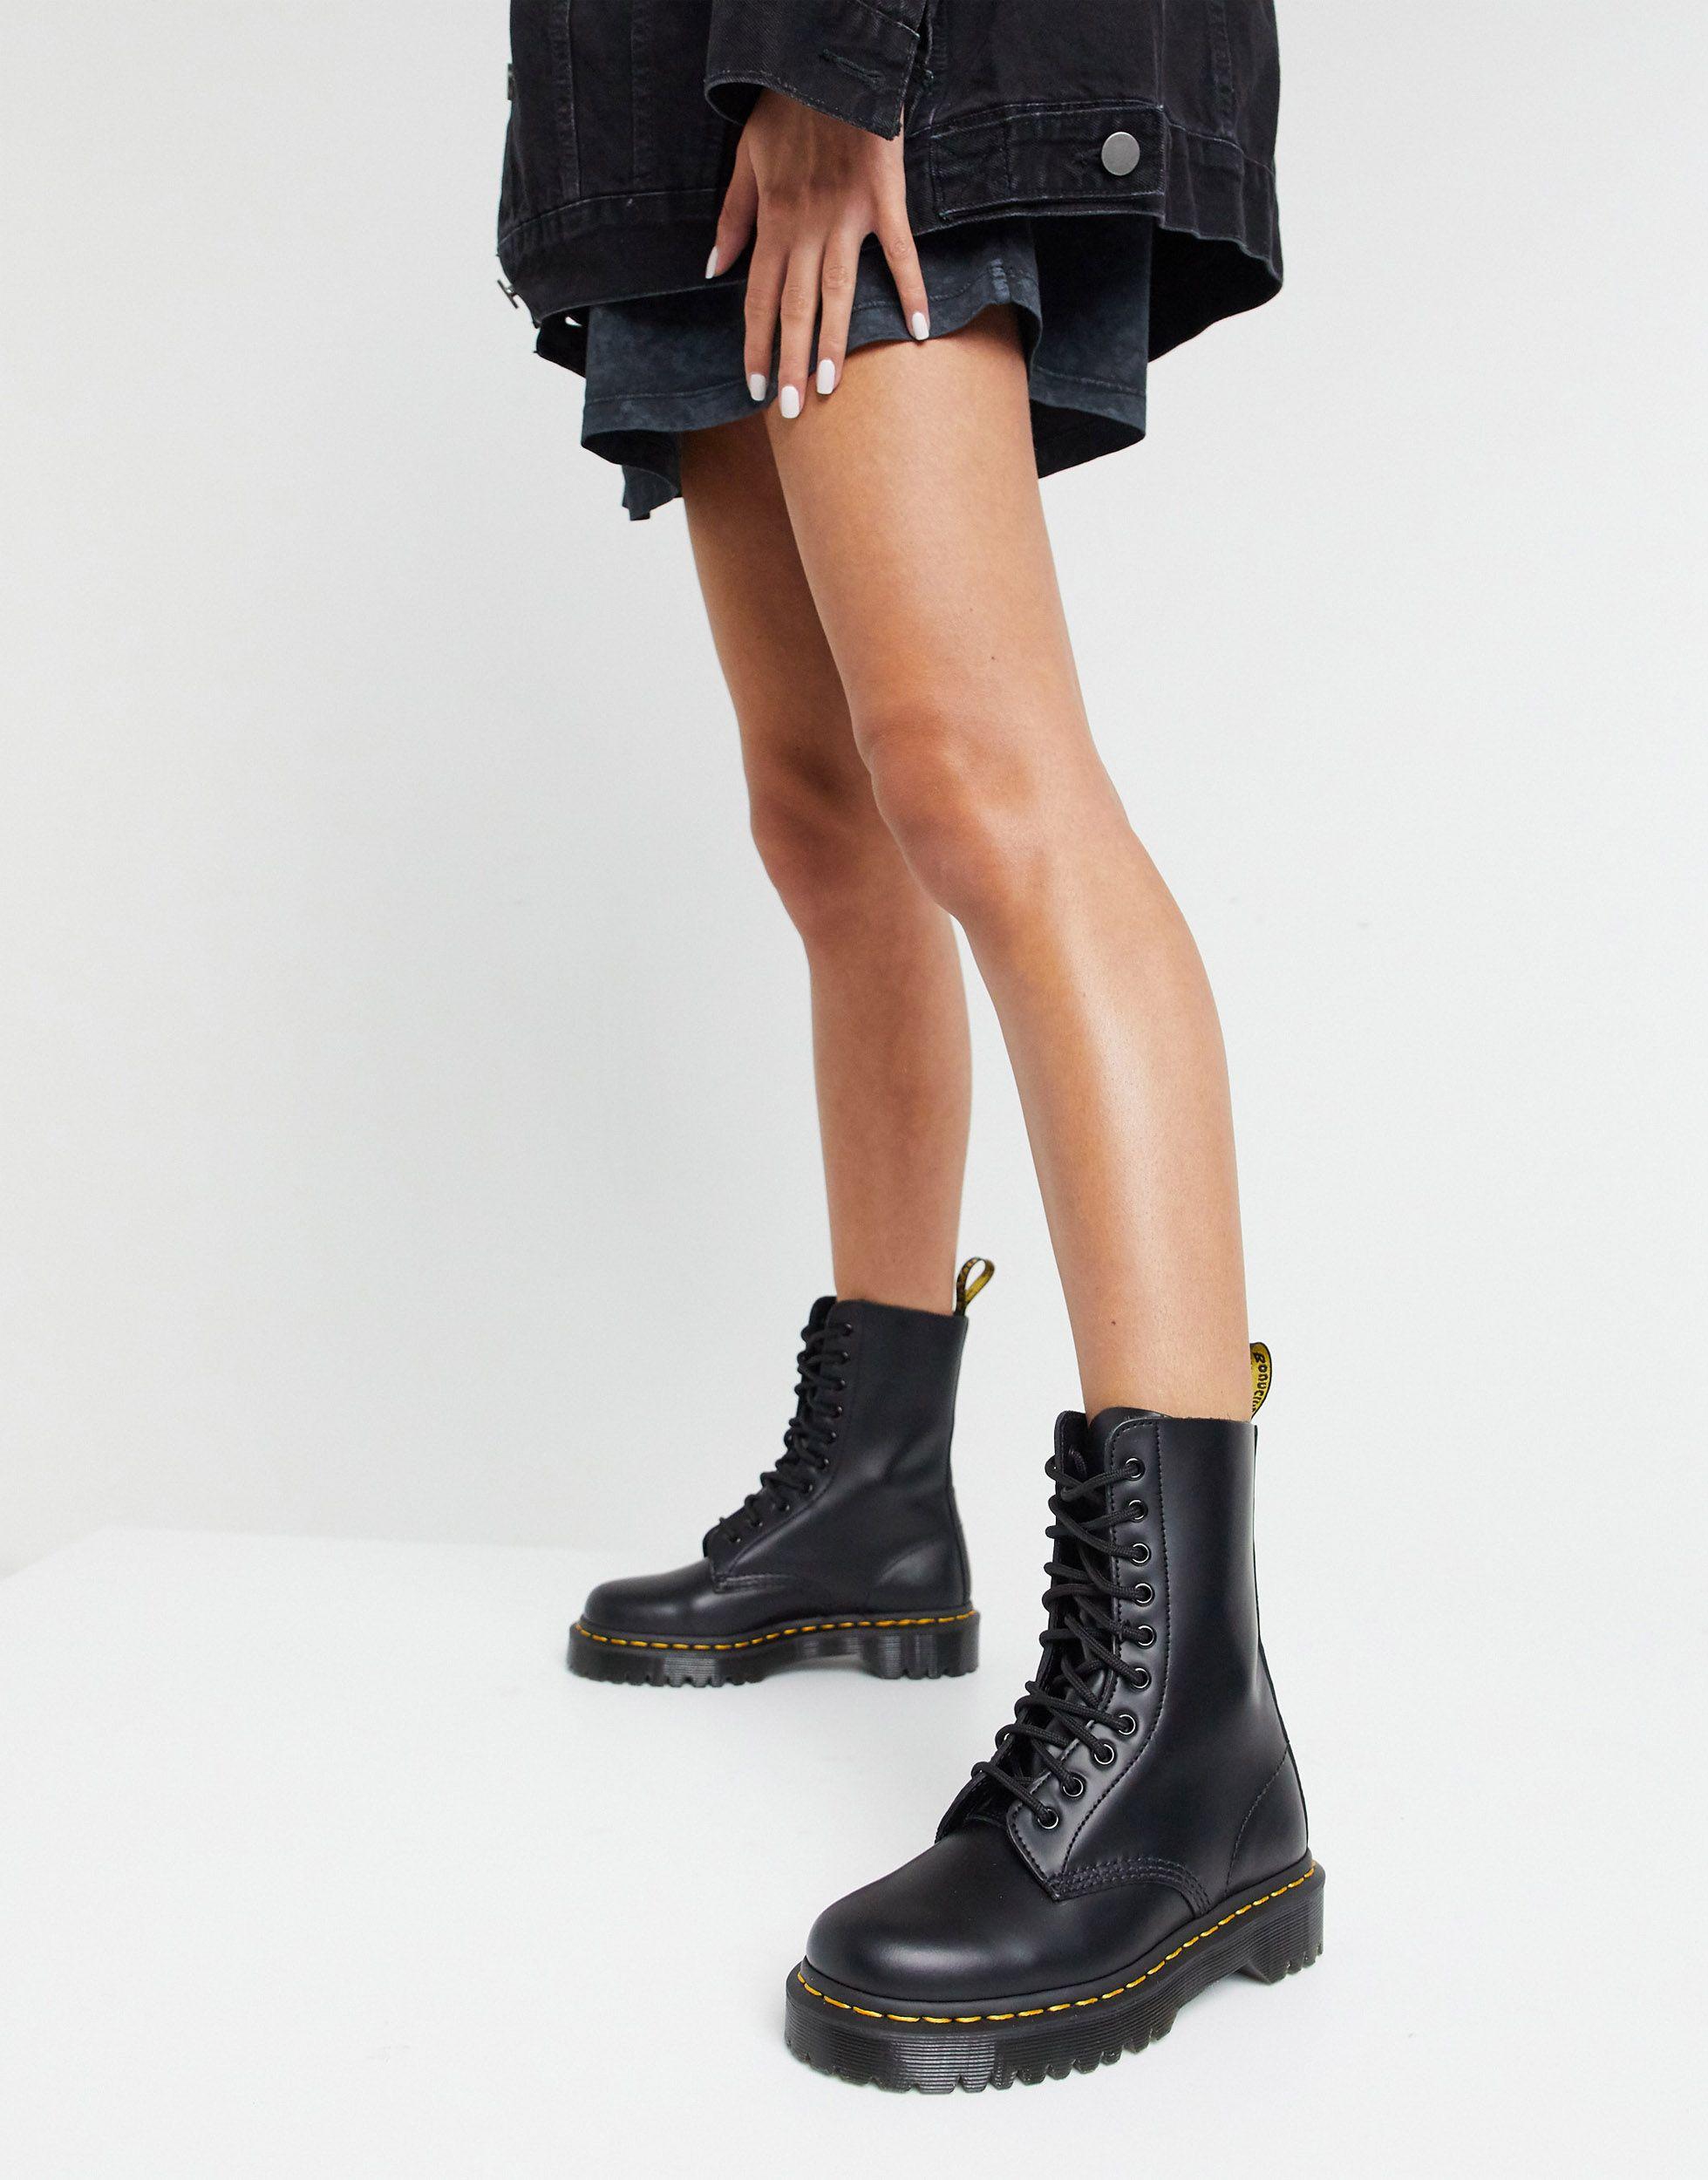 Dr. 1490 10 Eye Boots in Black |